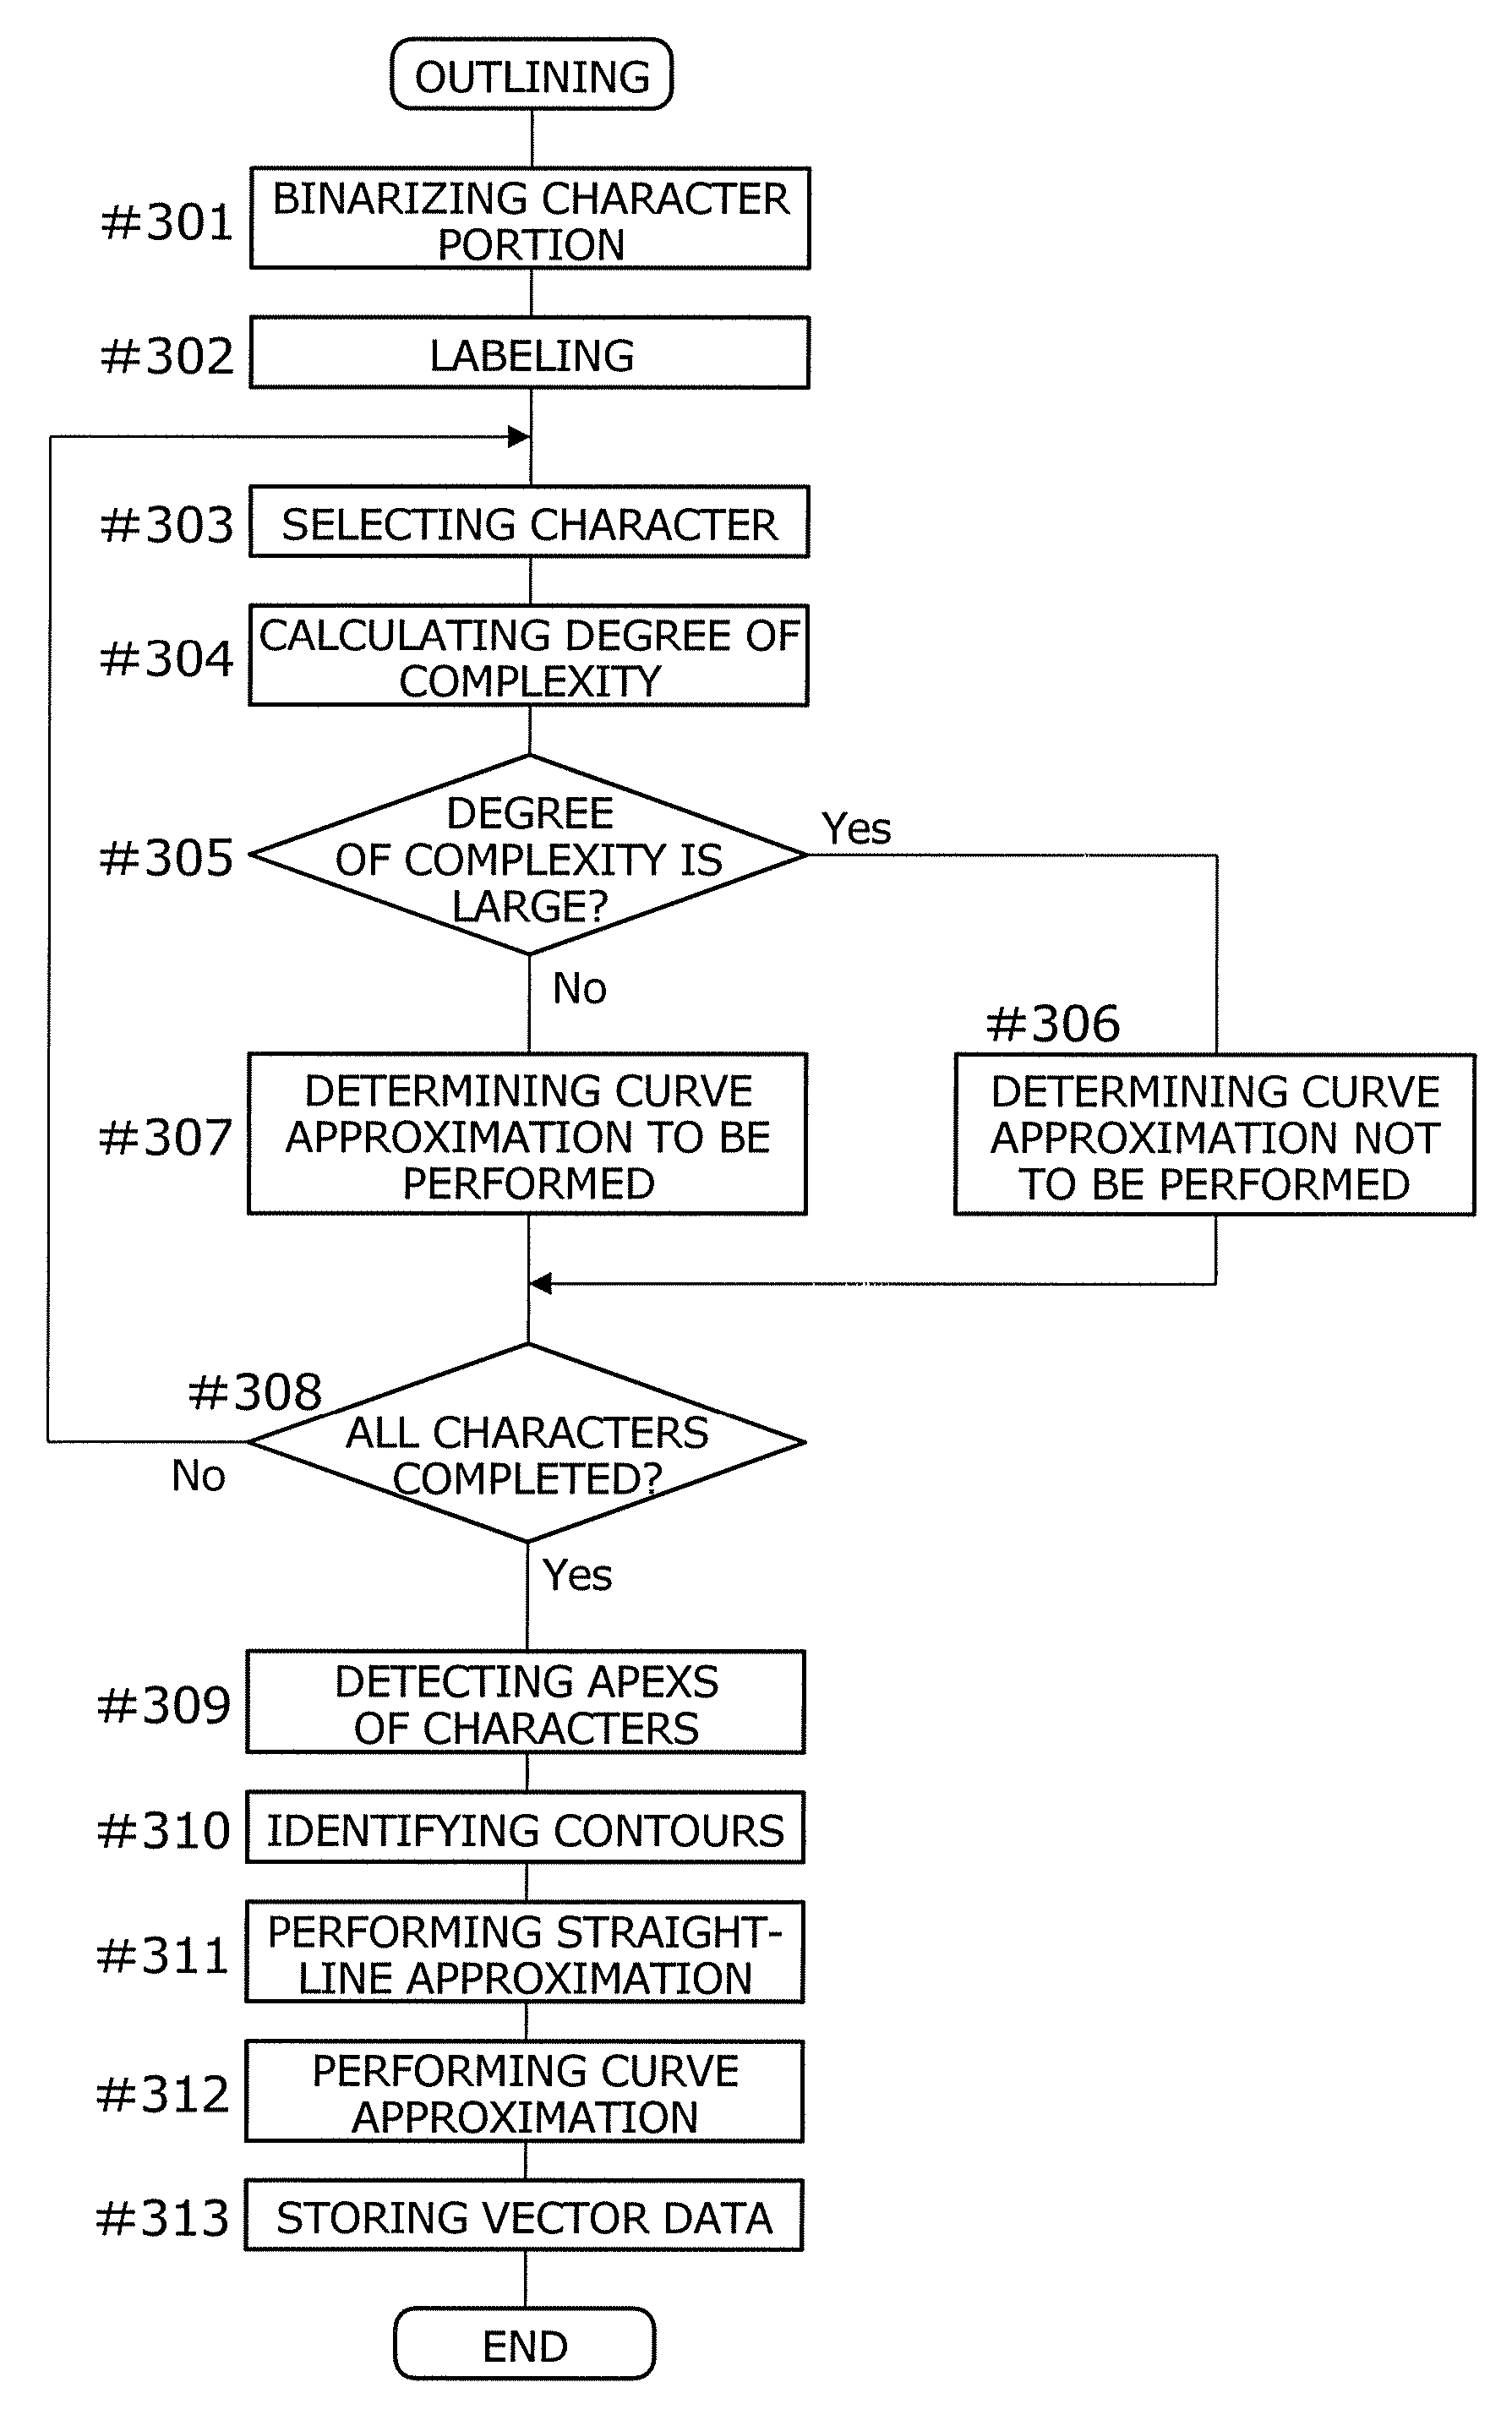 Image processing apparatus, image conversion method, and computer-readable storage medium for computer program based on calculated degree of complexity